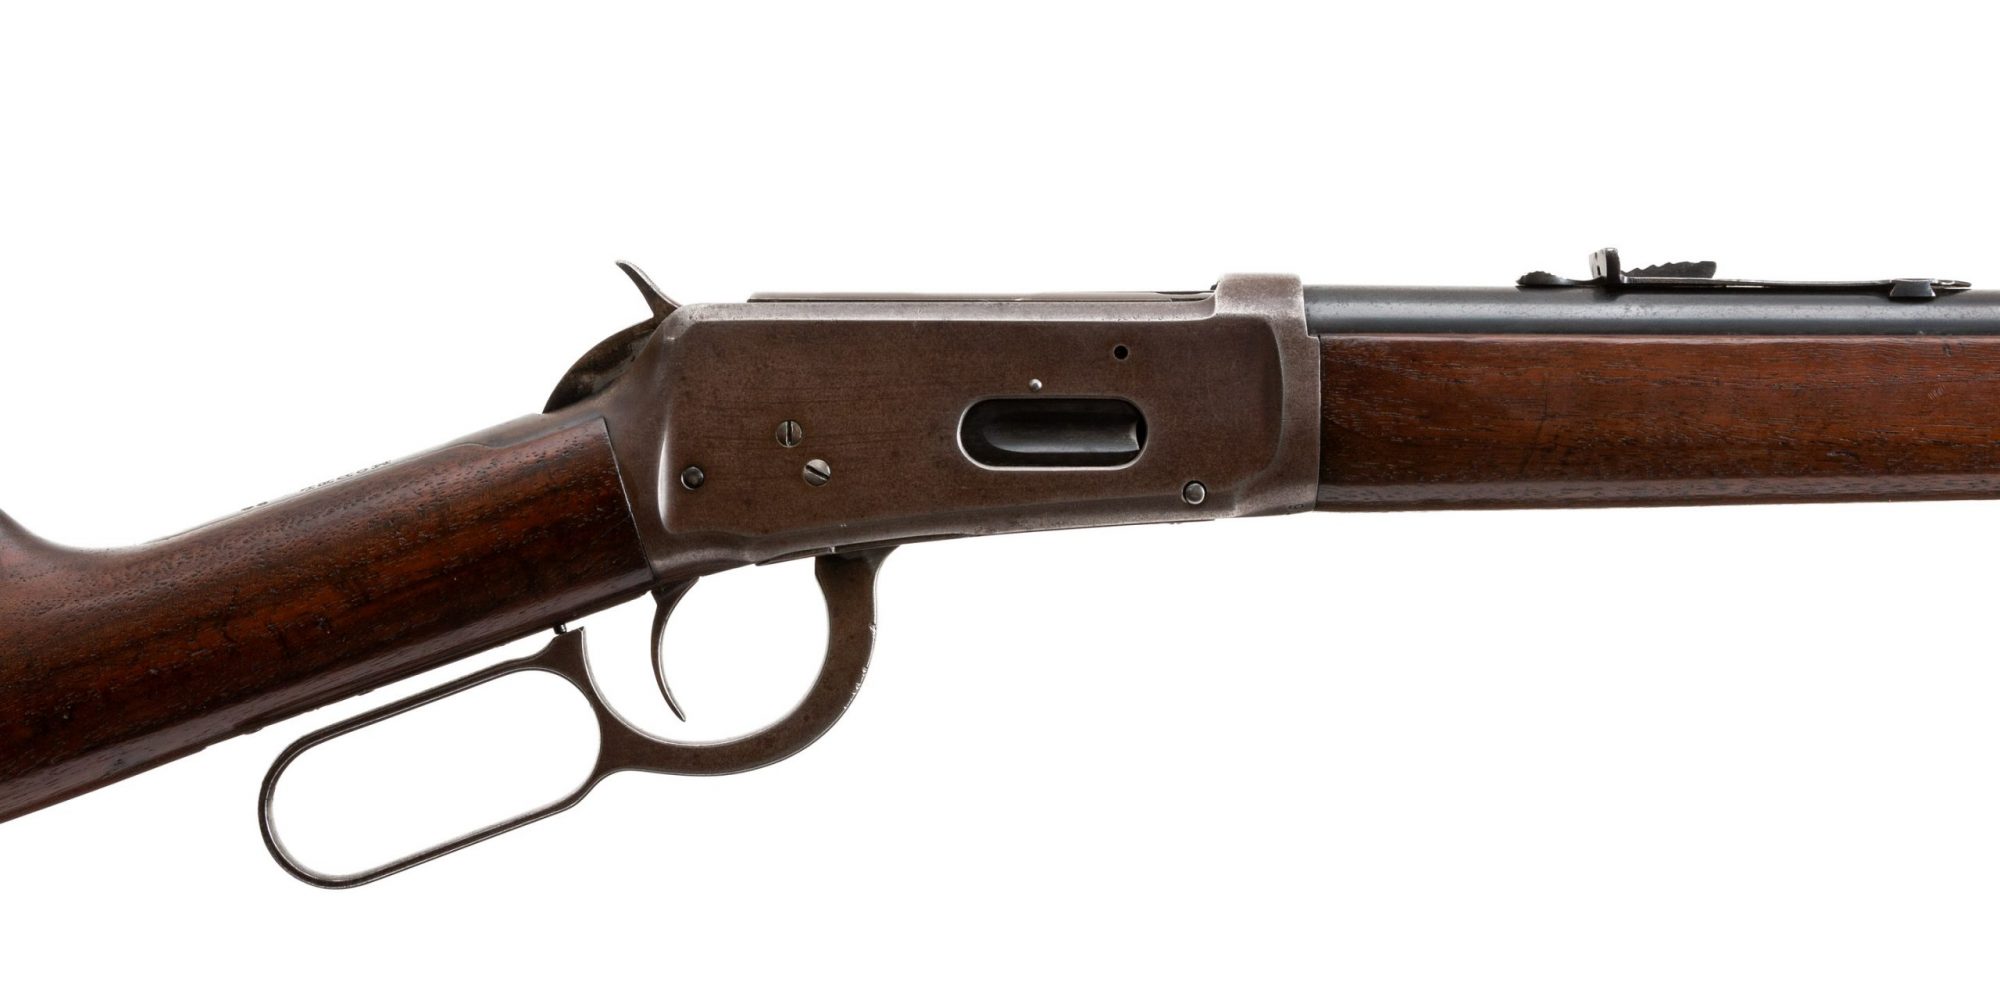 Photo of a pre-owned Winchester Model 94 from 1922, for sale by Turnbull Restoration of Bloomfield, NY